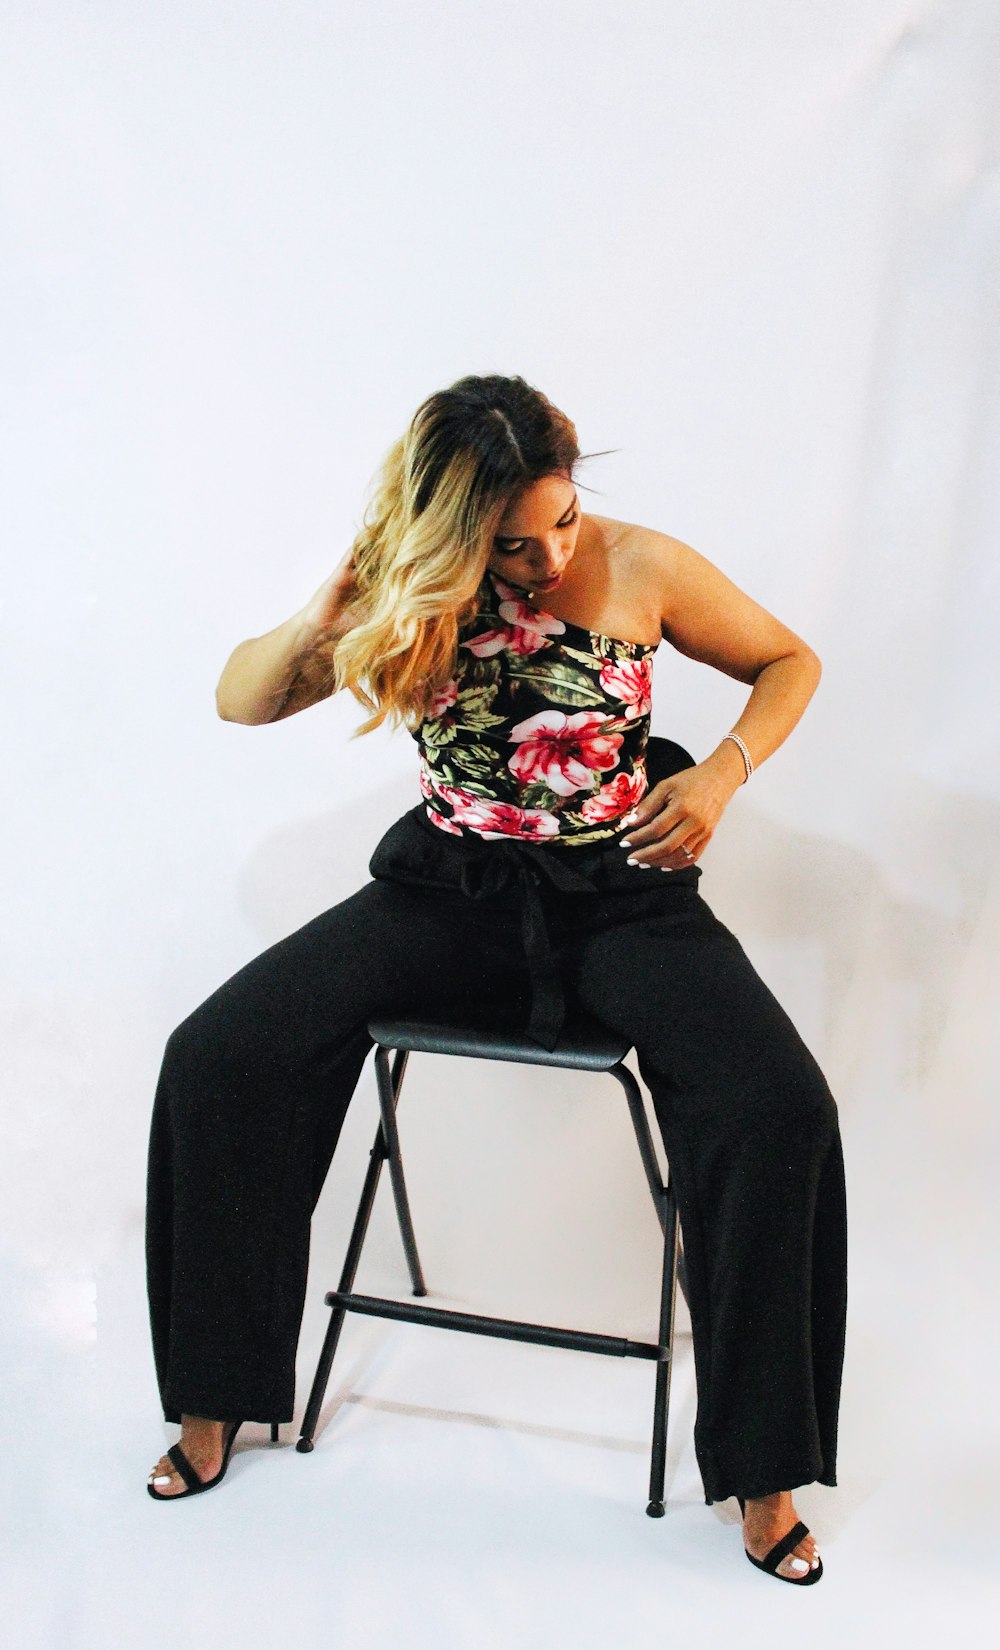 woman in black and red floral tank top and black pants sitting on chair